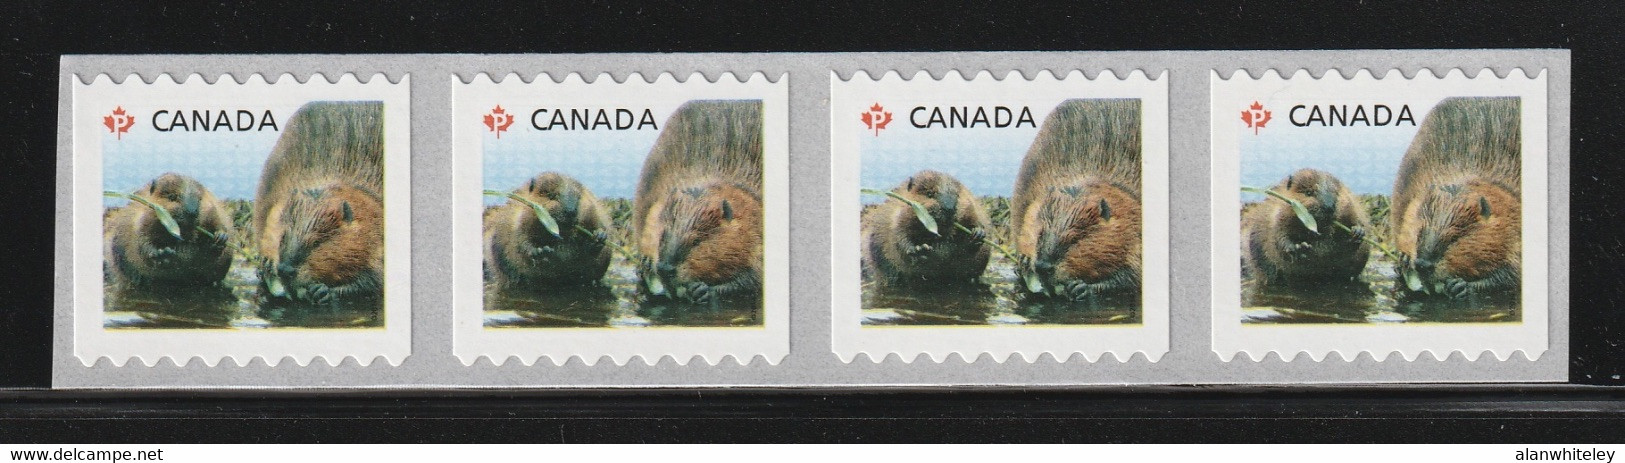 CANADA 2014 Definitives / Young Wildlife / Beaver S/ADH: Strip Of 4 Stamps (Sideways) UM/MNH - Coil Stamps